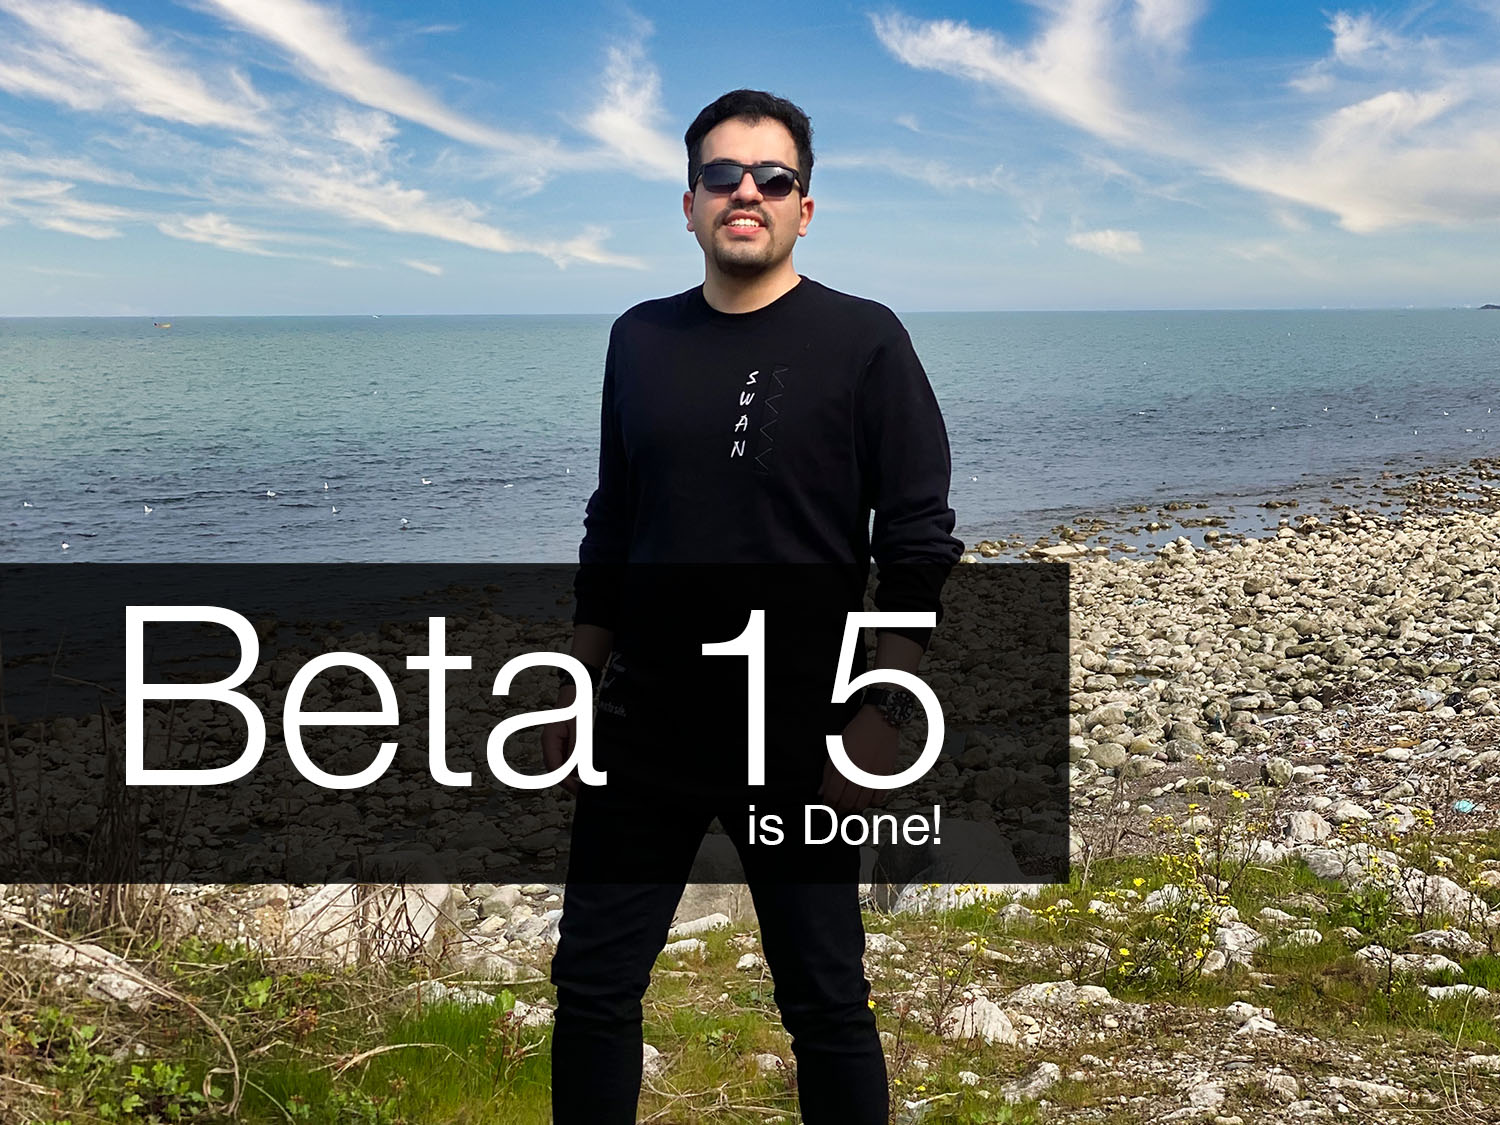 Beta 15 is Done!